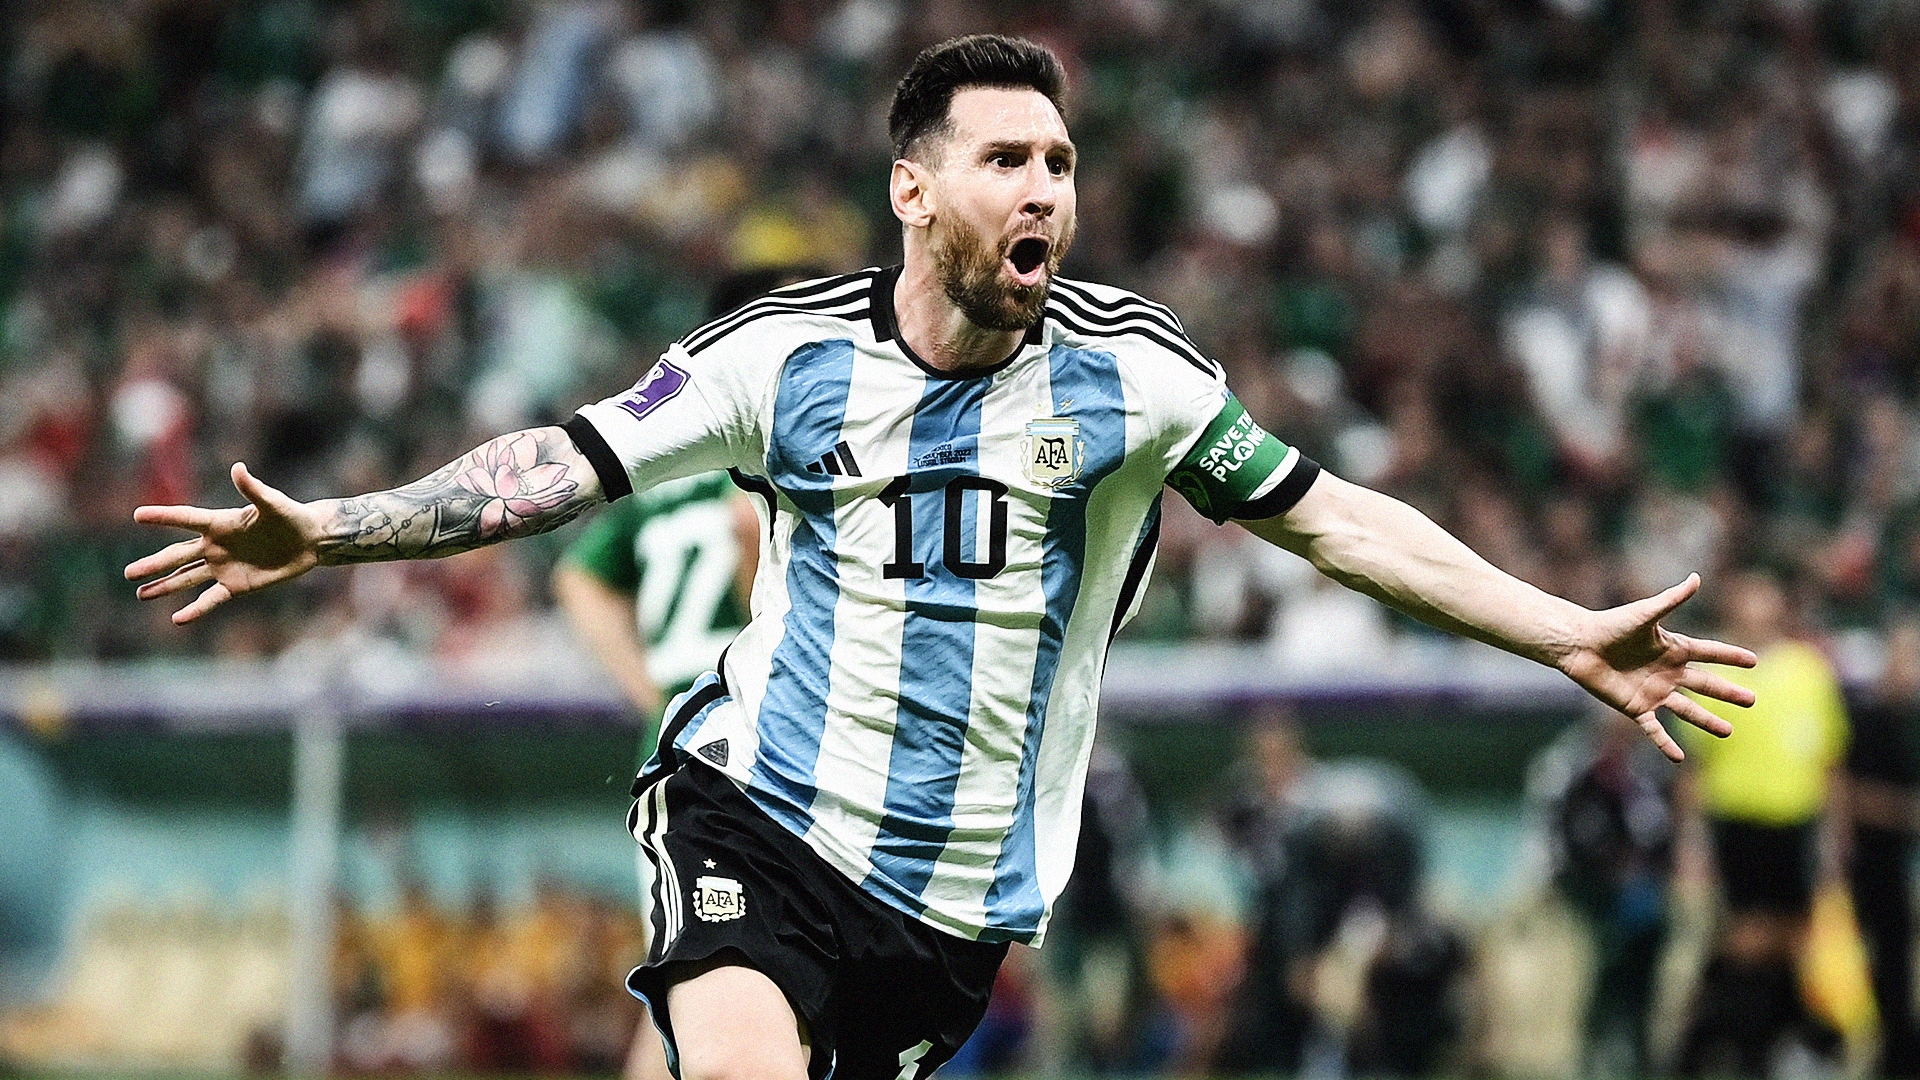 Lionel Messi: What Is He The ‘God’ of Again?